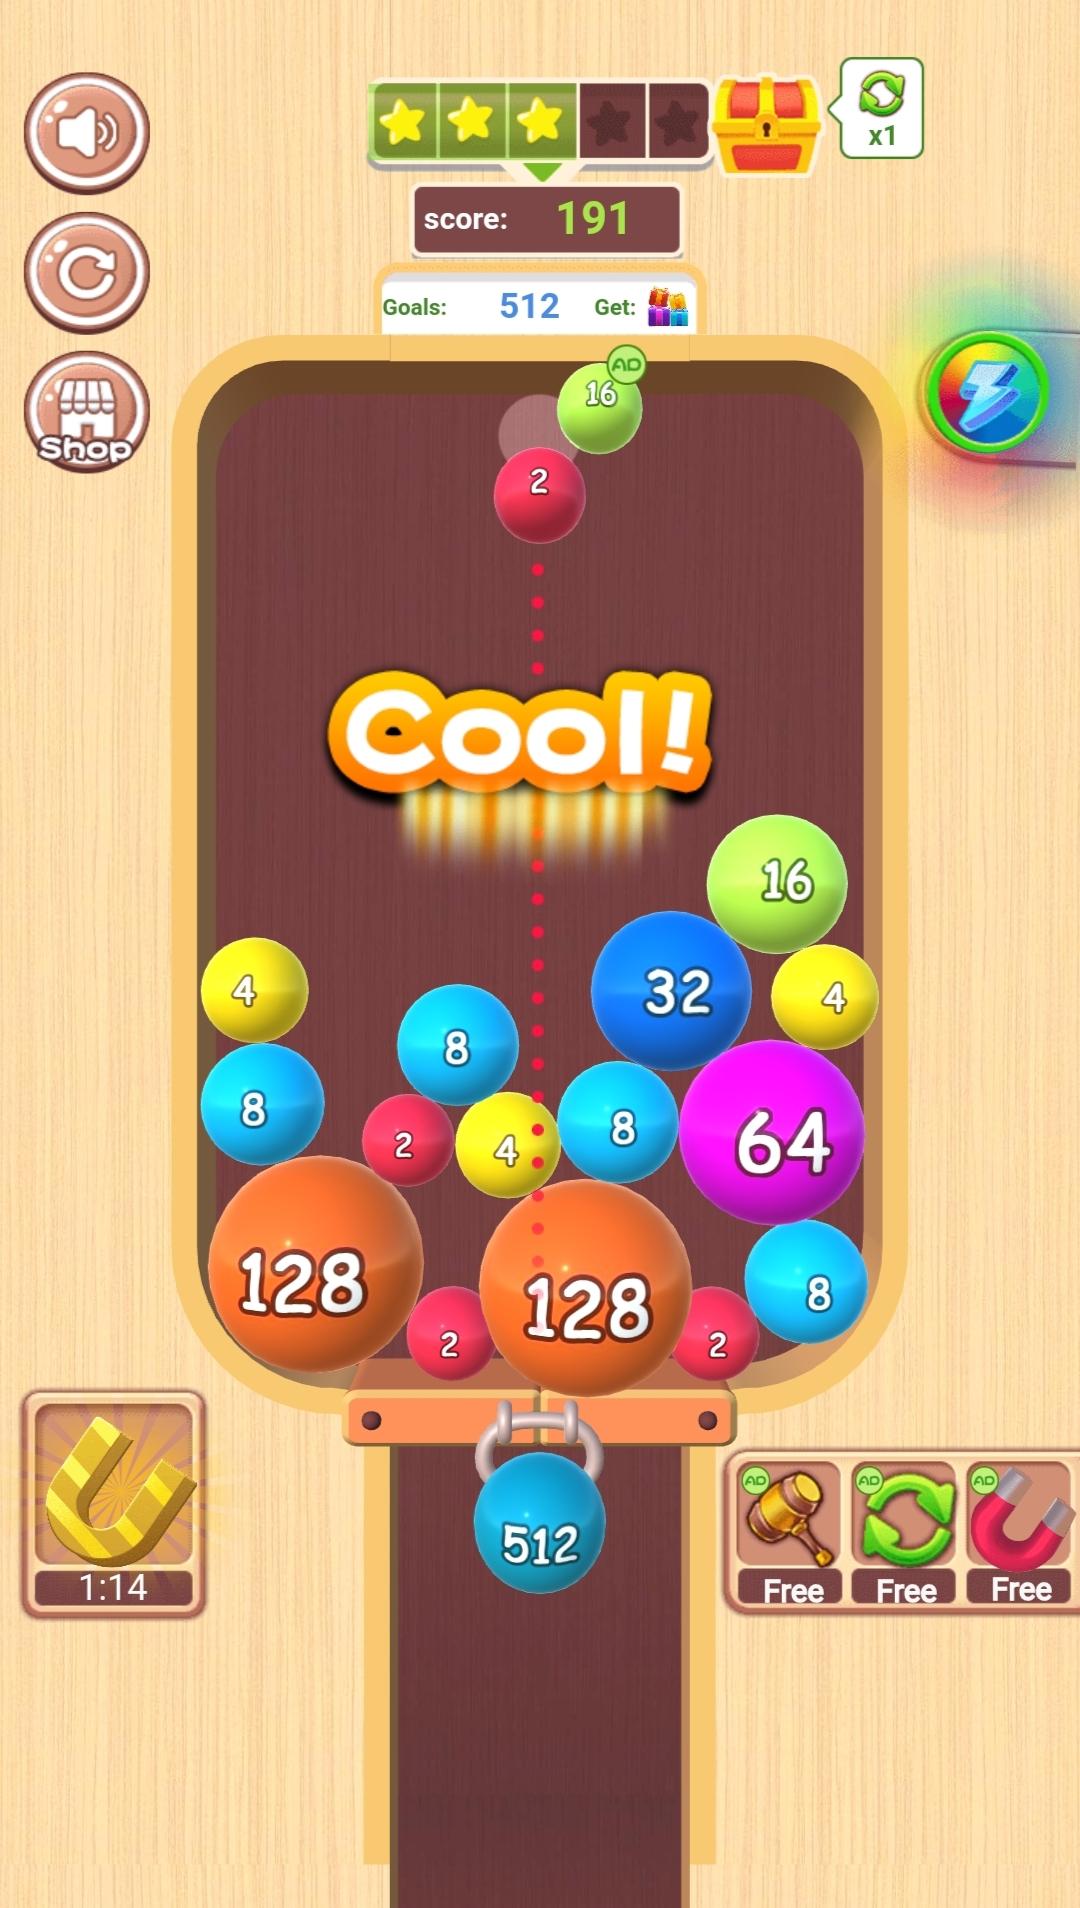 Ball busters. Бол Бастер. Bubble Buster 2048 Android 4.4 or later. Бравул пас на Бастер. A Buster on the balls.